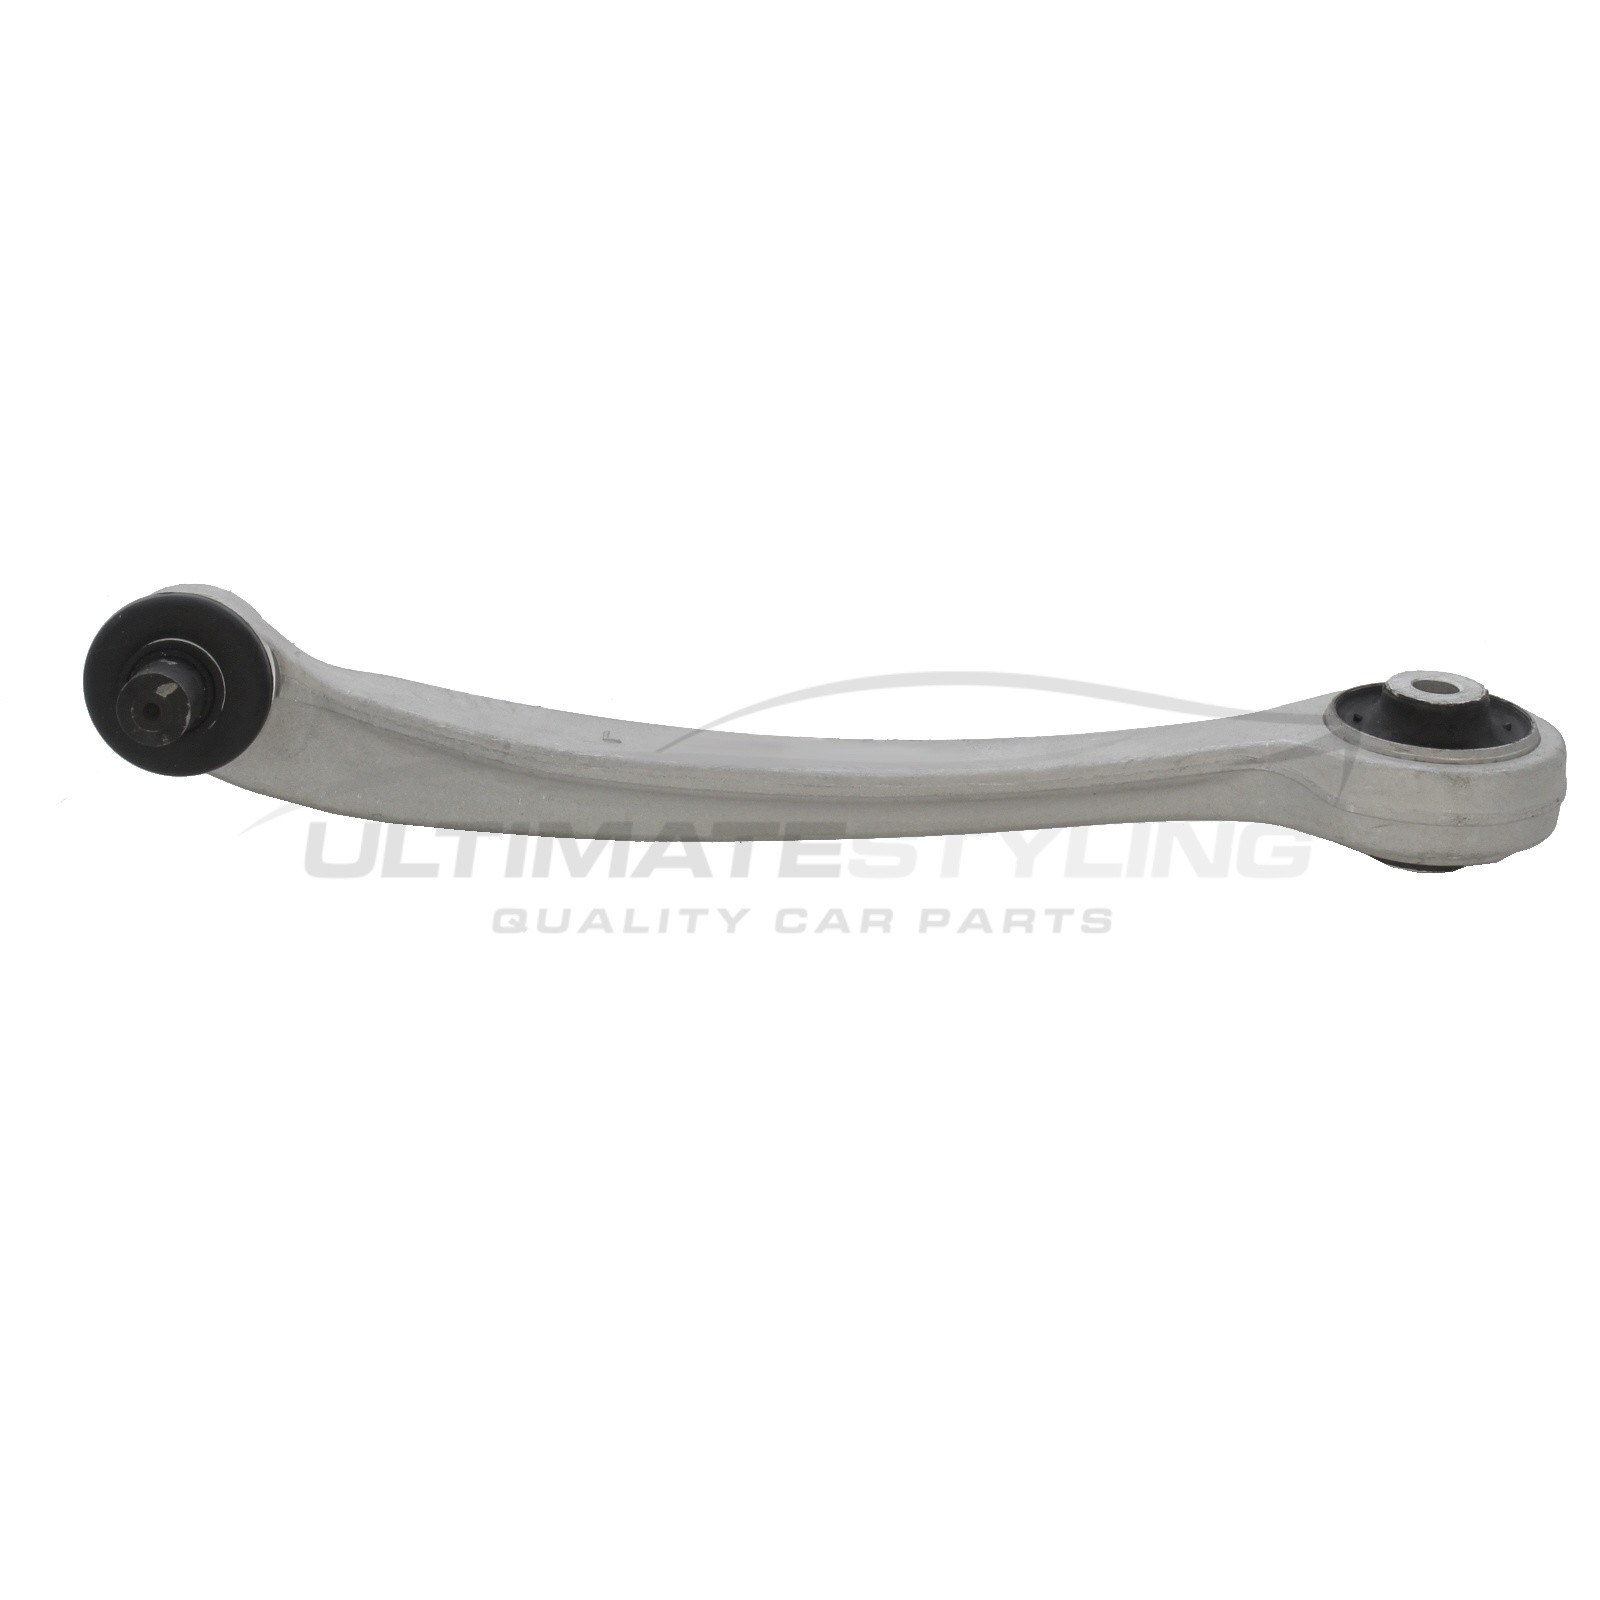 Audi A4, A6, A8, Allroad, RS4, RS6, S4, S6, S8 / Seat Exeo / Skoda Superb / VW Passat Front Upper Suspension Arm Alloy Including 16mm Ball Joint and Rear Bush Front of Wheel Passenger Side Left Hand